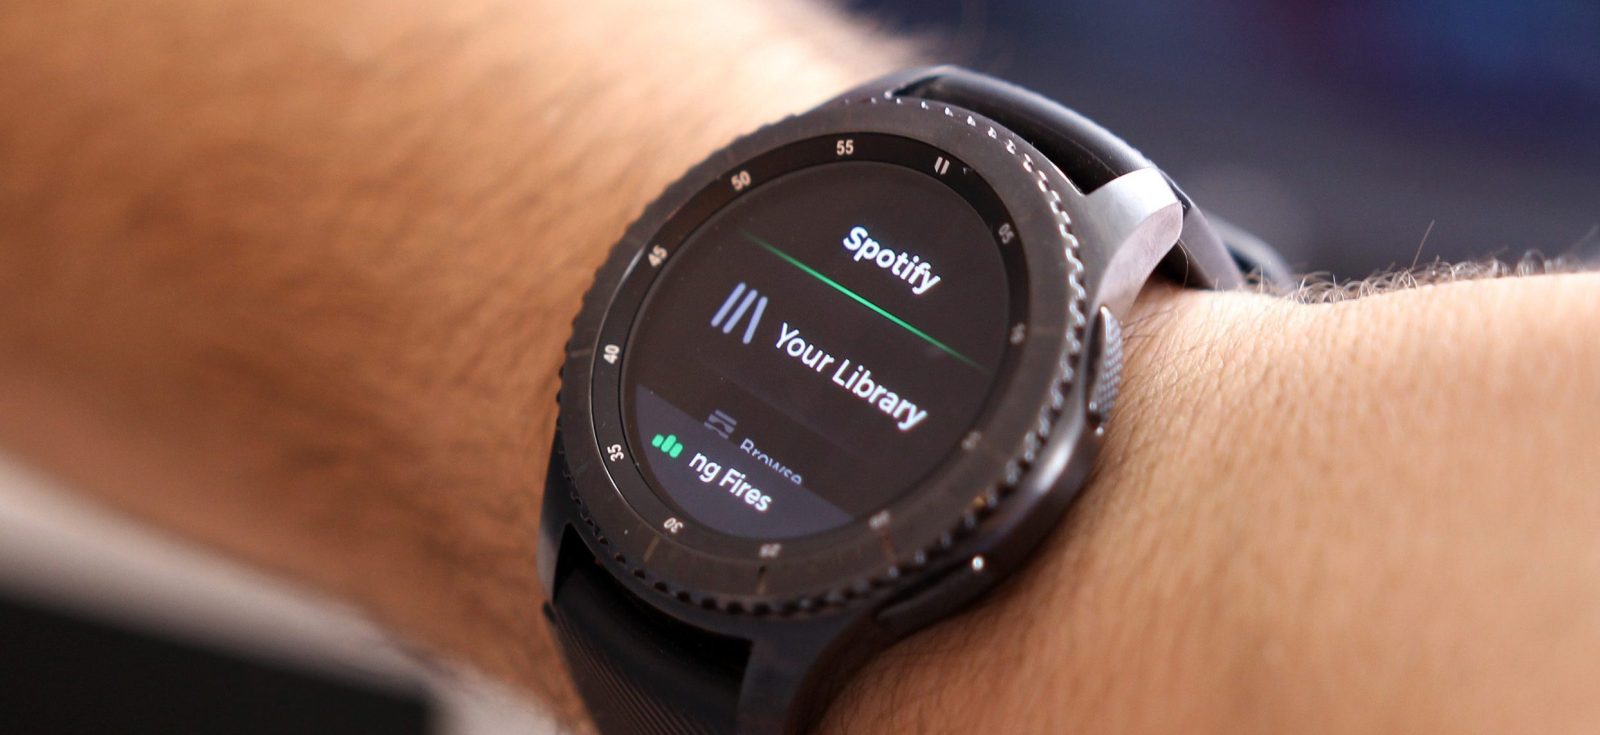 Download Spotify For Samsung Gear S3